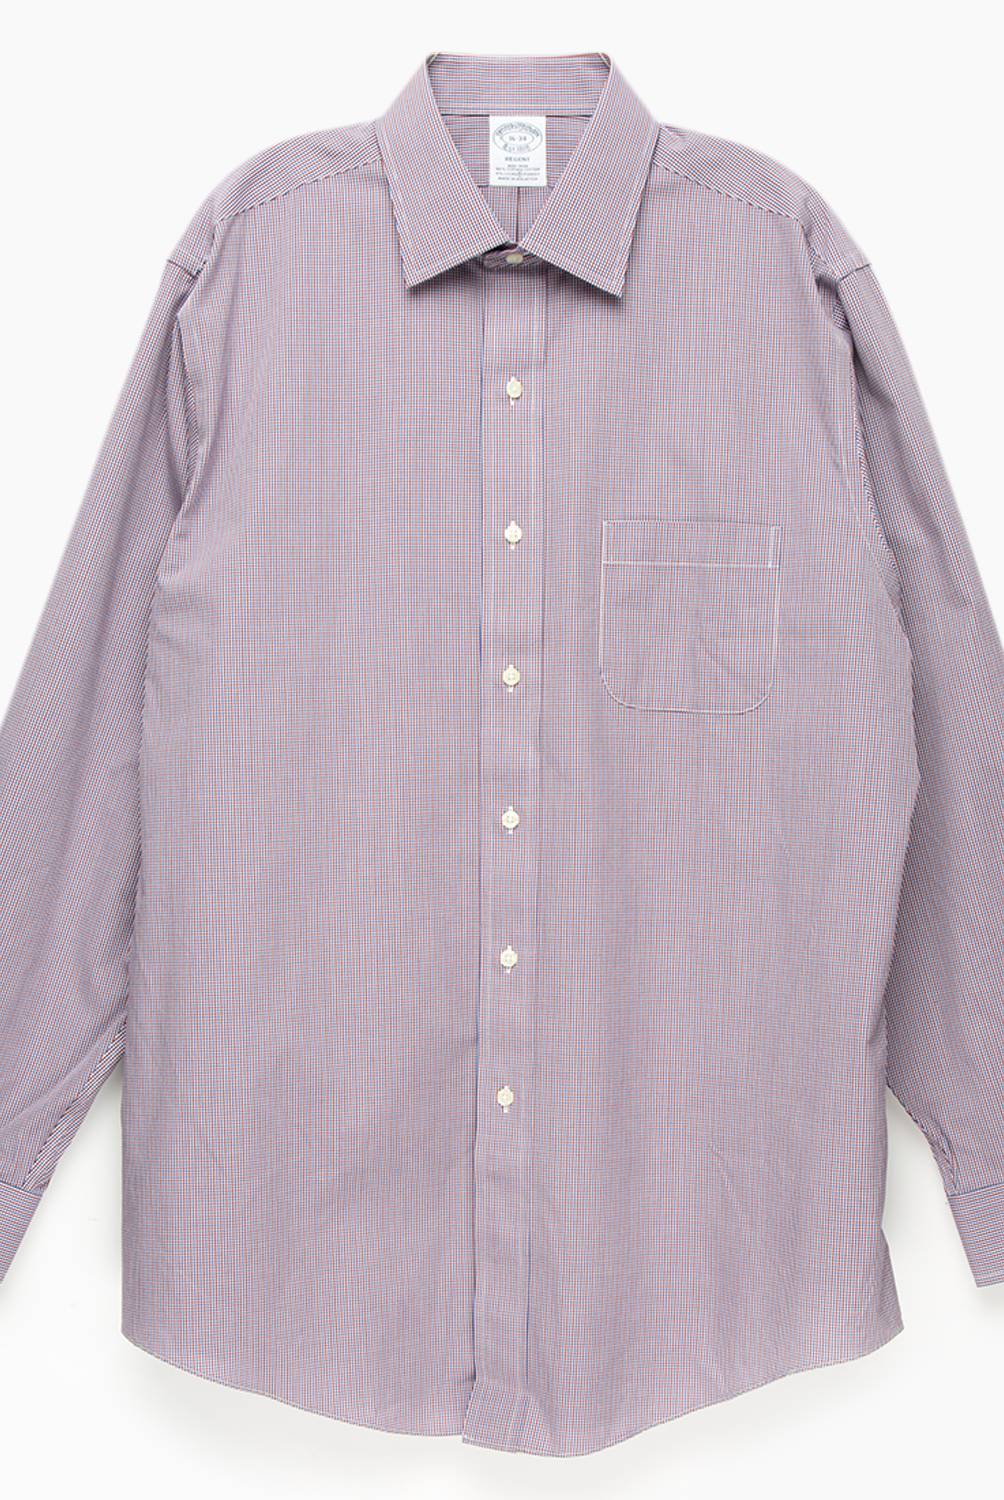 BROOKS BROTHERS - Camisa Casual Classic Fit